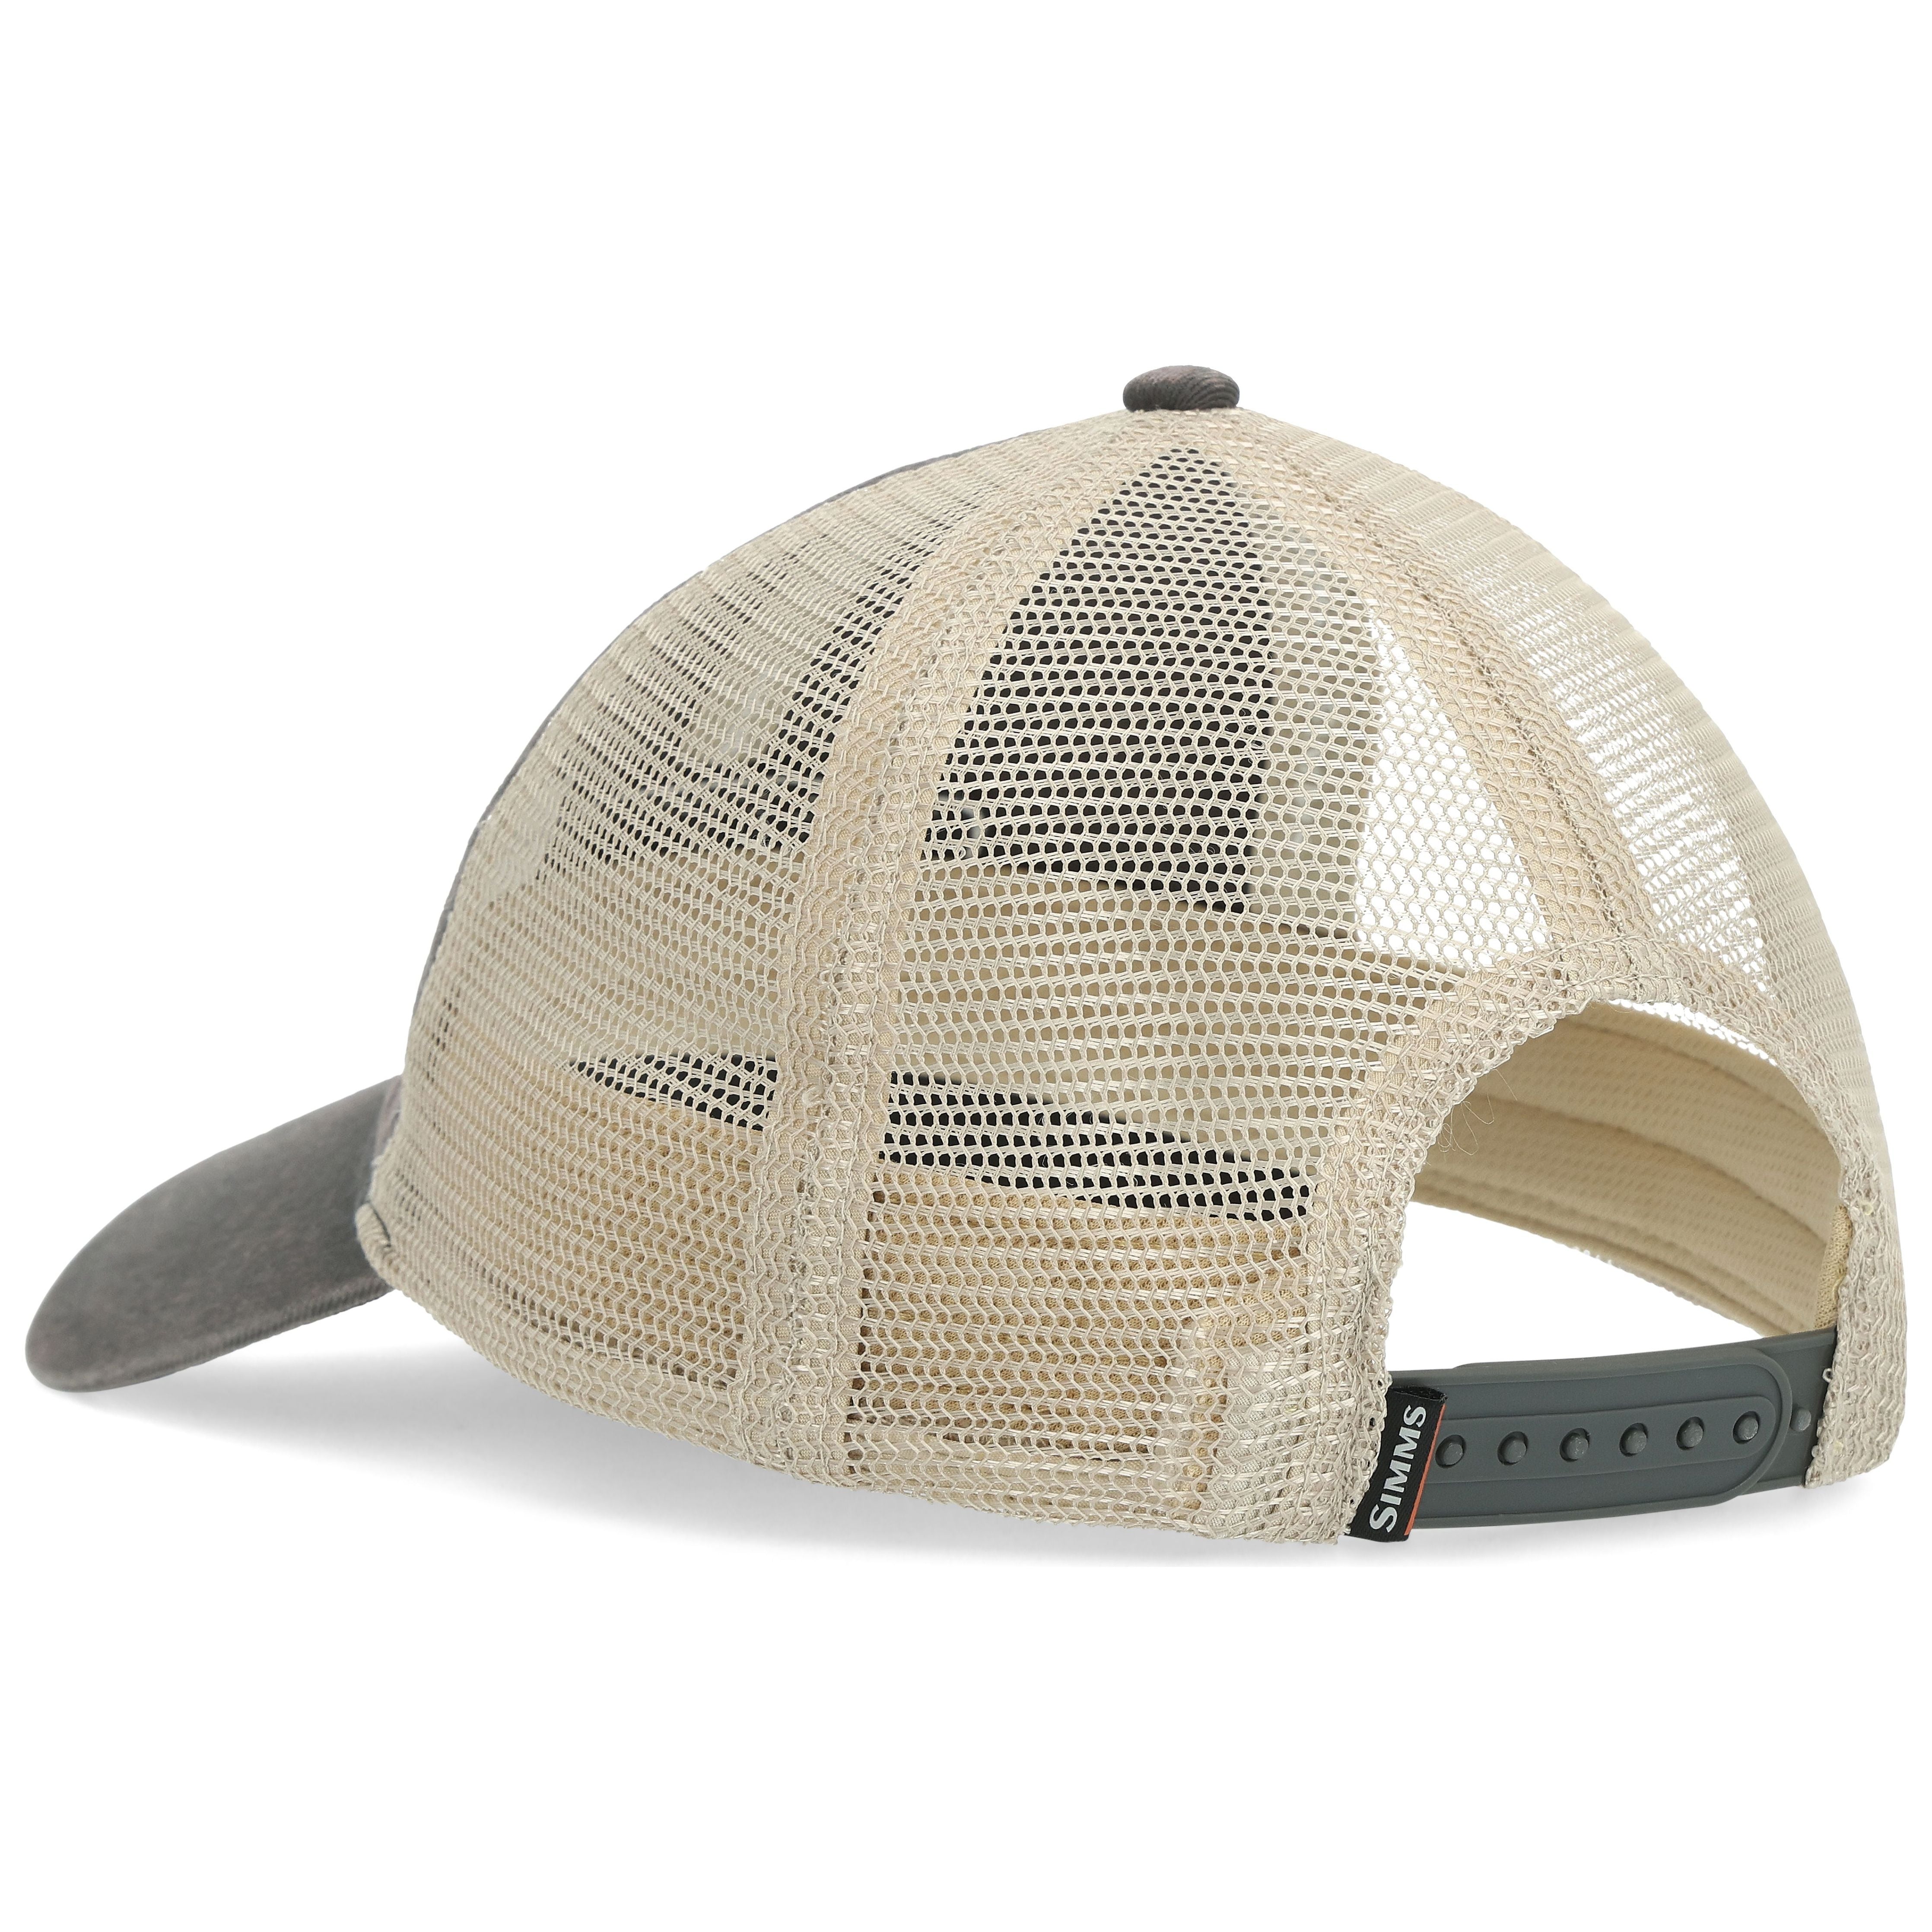 Simms Heritage Trucker Carbon Image 02